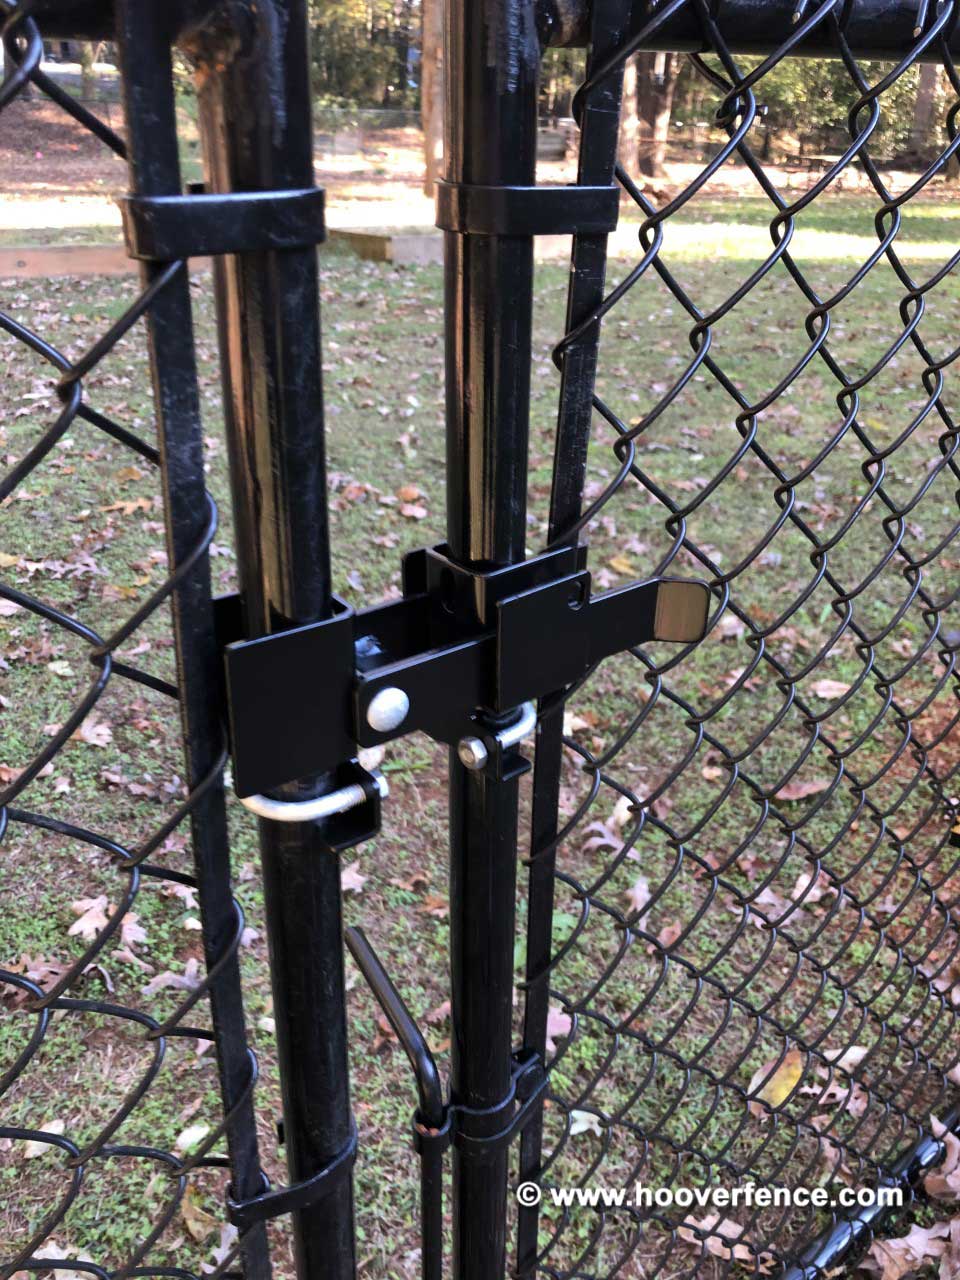 Customer Install - DAC-4138-B Installed on Black Chain Link Fence Double Swing Gate